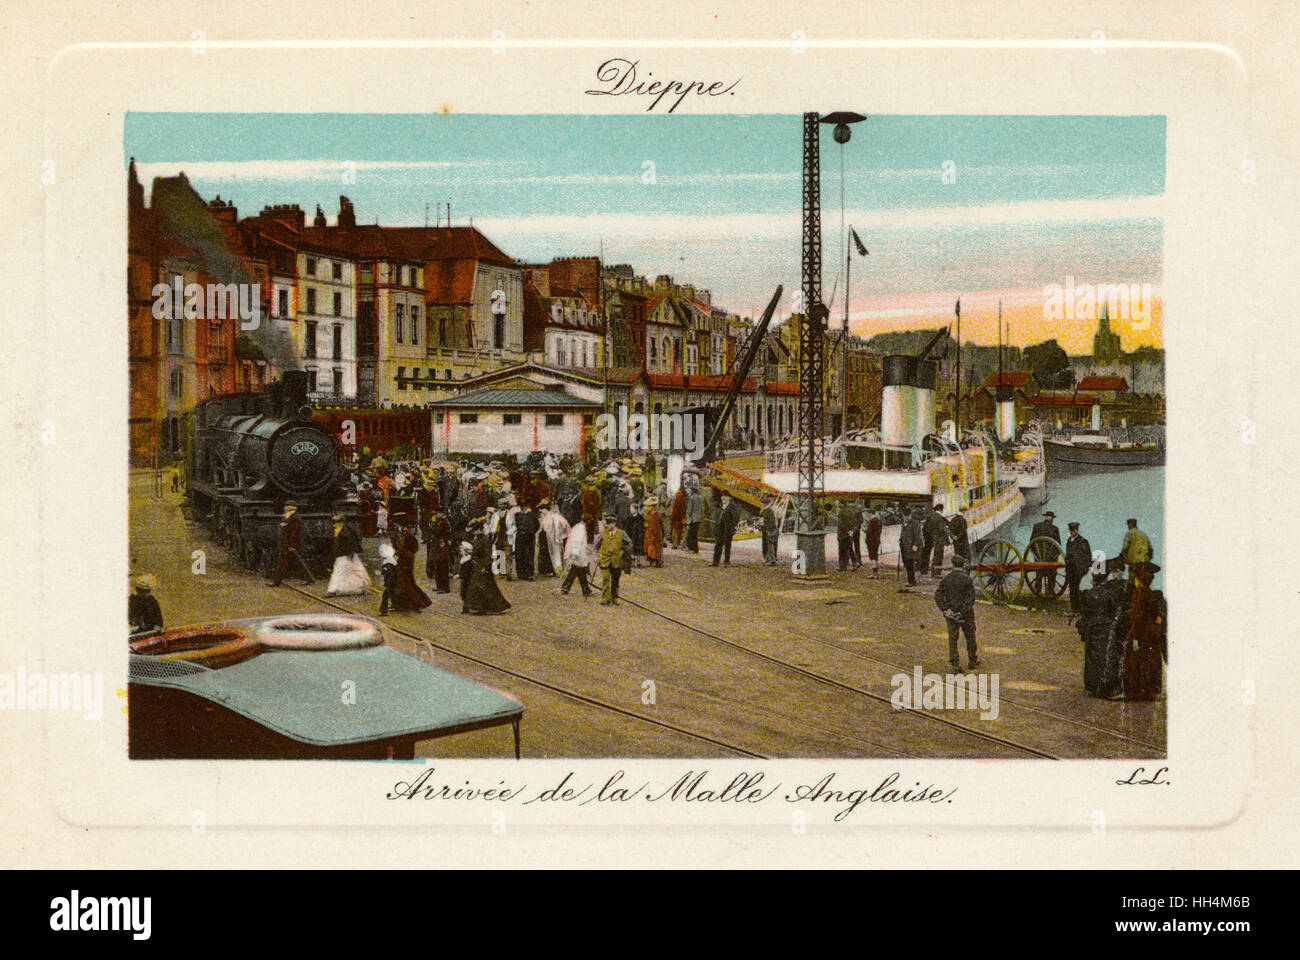 Dieppe, France - Arrival of the English Steam Packet Boat. Stock Photo